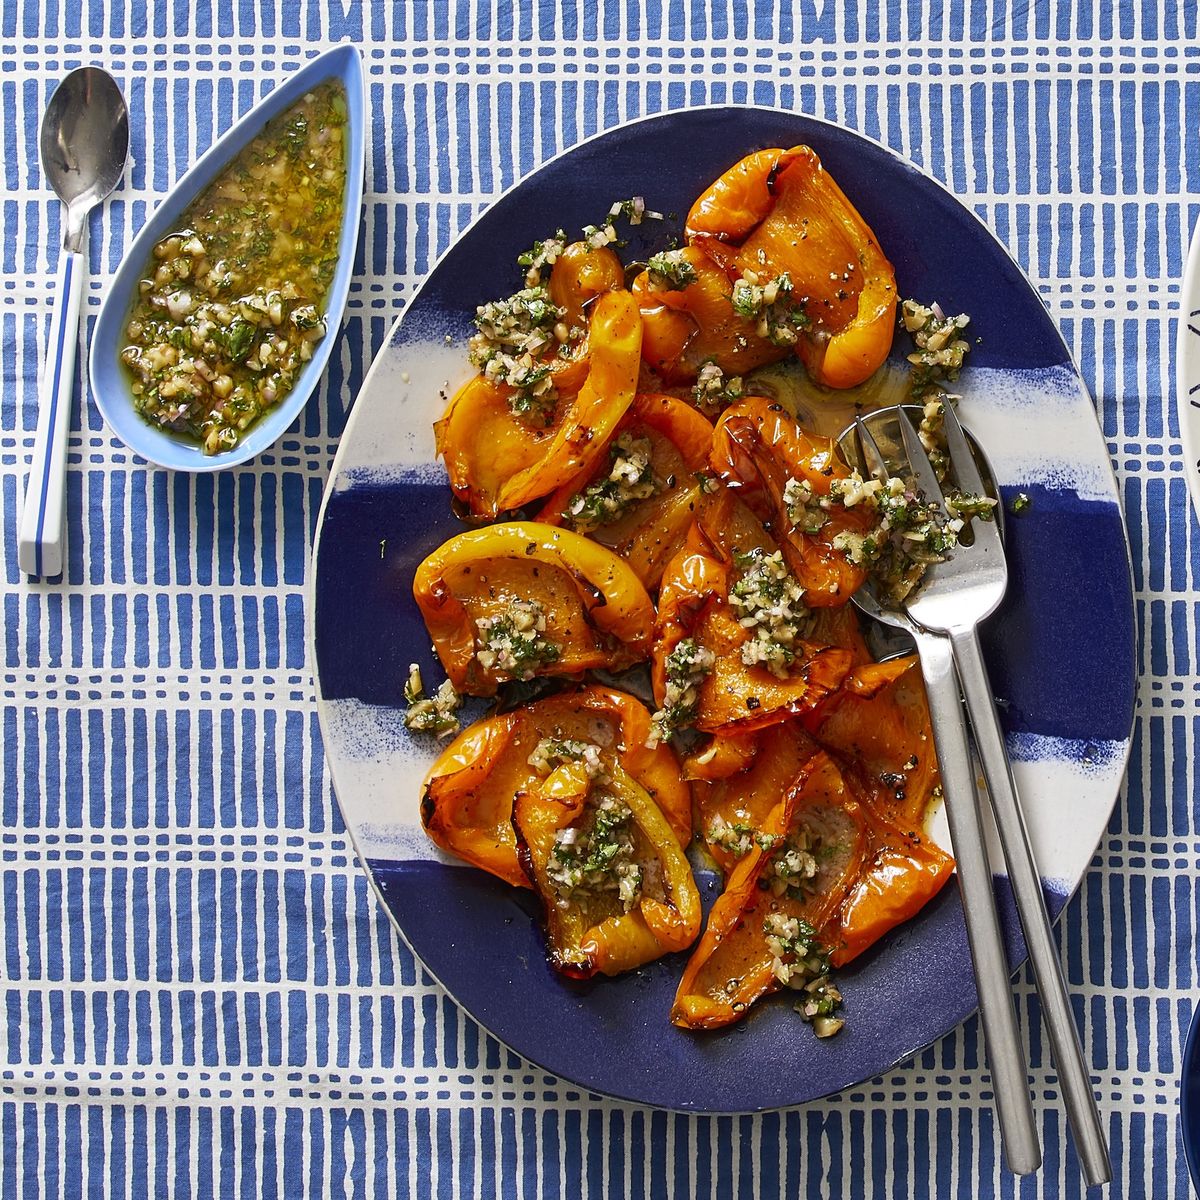 Slow-Roasted Orange Bell Peppers with Walnut Relish